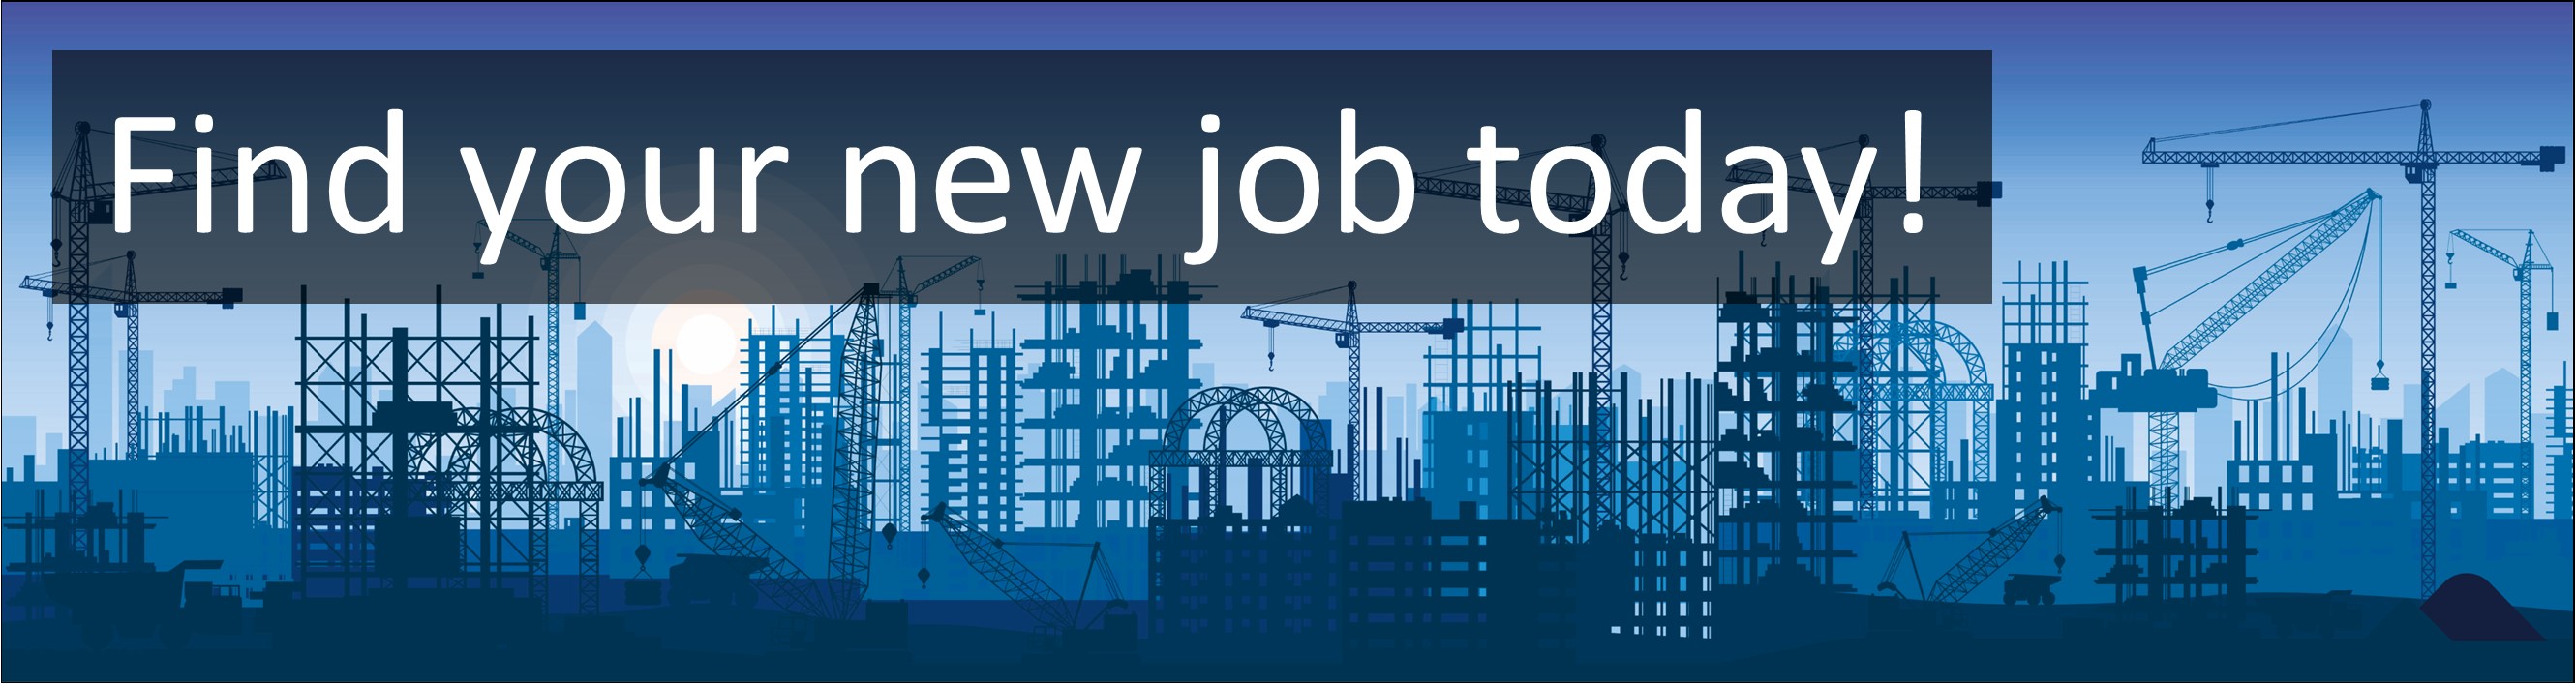 Construction & Trades Jobs. Joiner / Shop Fitter / Carpenter Jobs, Careers & Vacancies in Stone, Stafford, Stoke, Staffordshire Advertised by AWD online – Multi-Job Board Advertising and CV Sourcing Recruitment Services